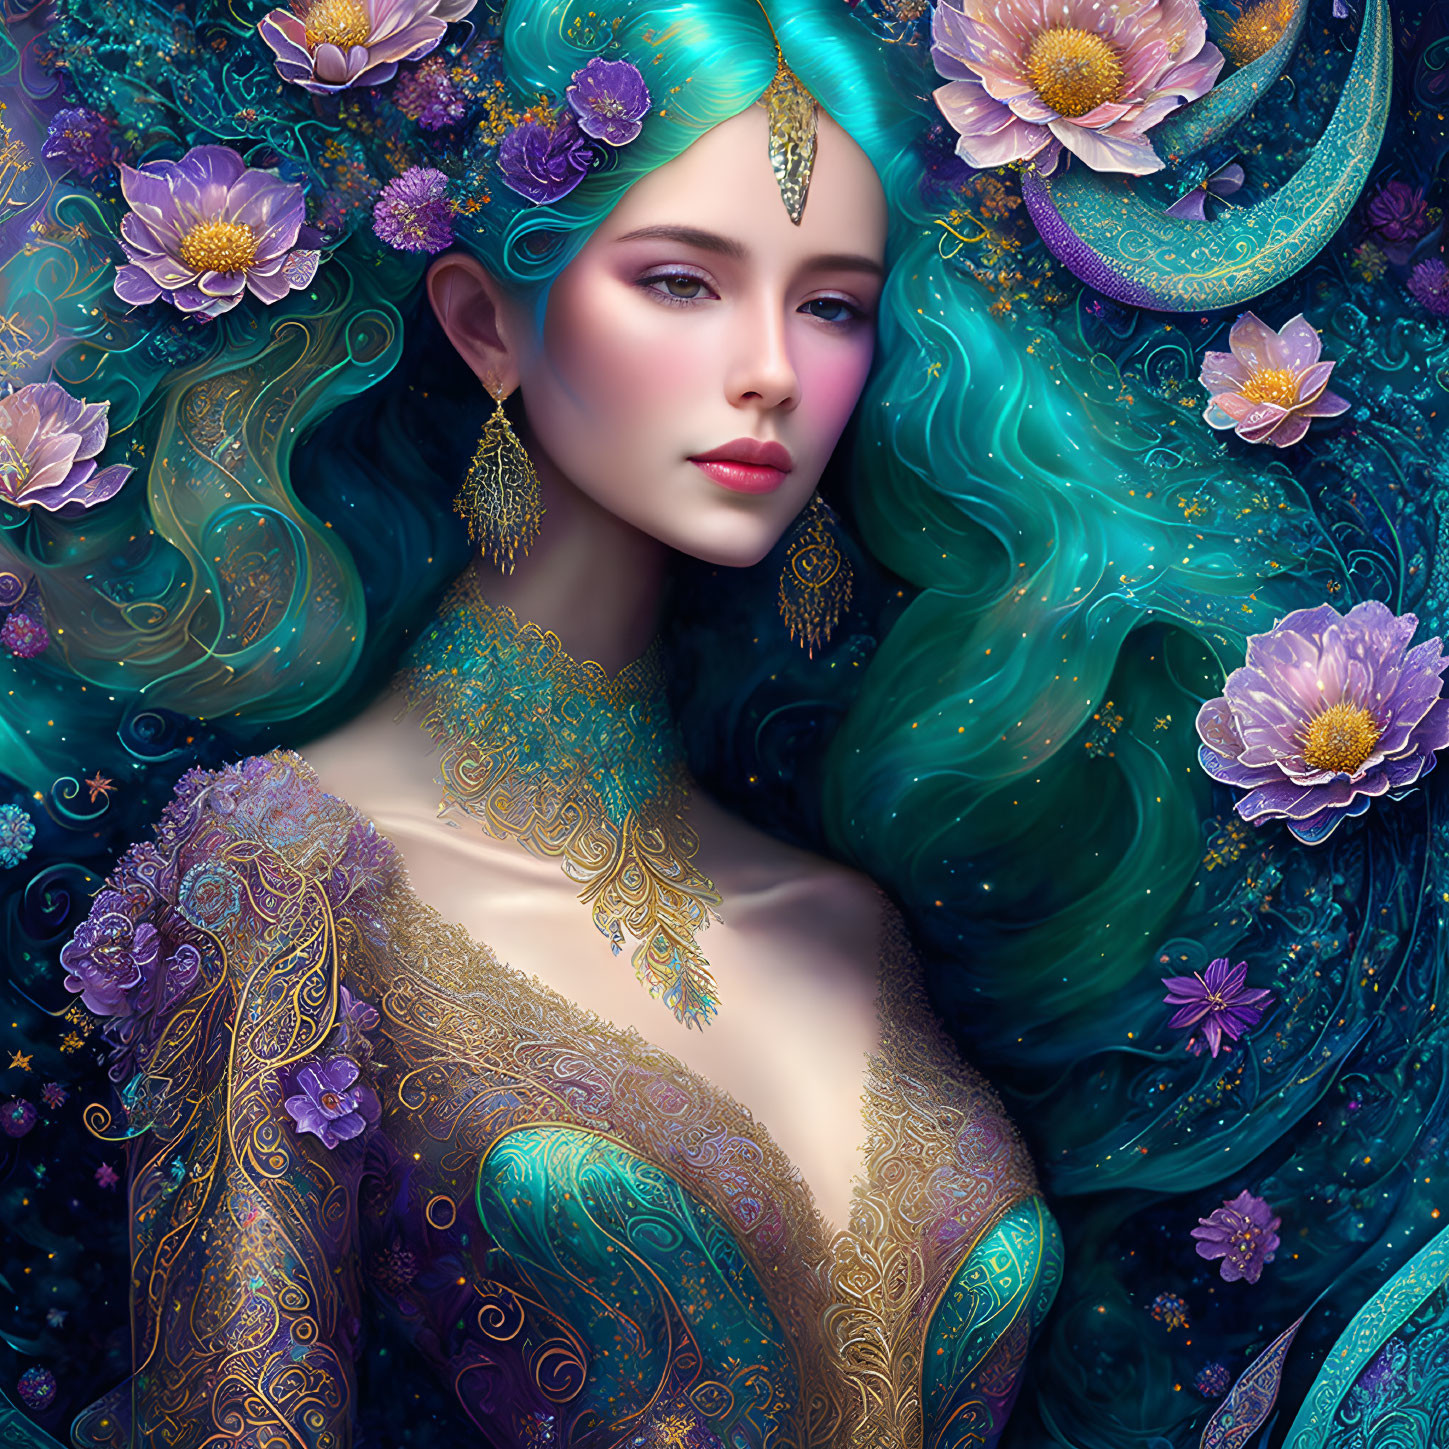 Digital Artwork: Woman with Turquoise Hair and Floral Background